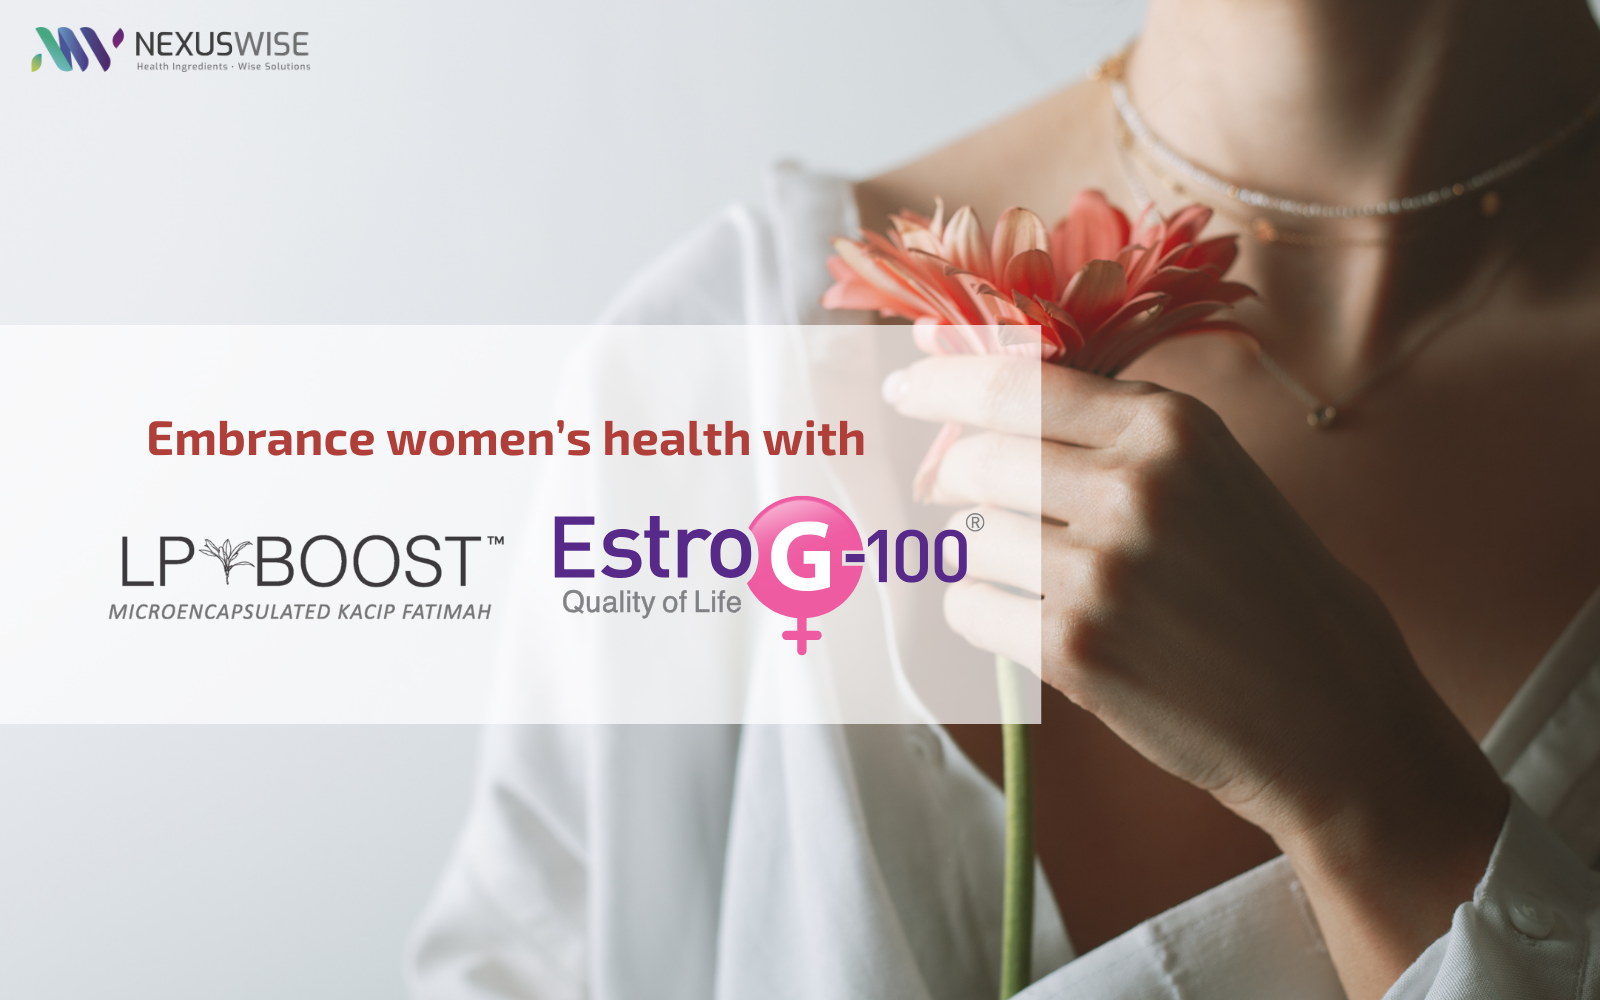 nexus wise lpboost™ and estrog 100® say goodbye to pcos and menopause ! 07